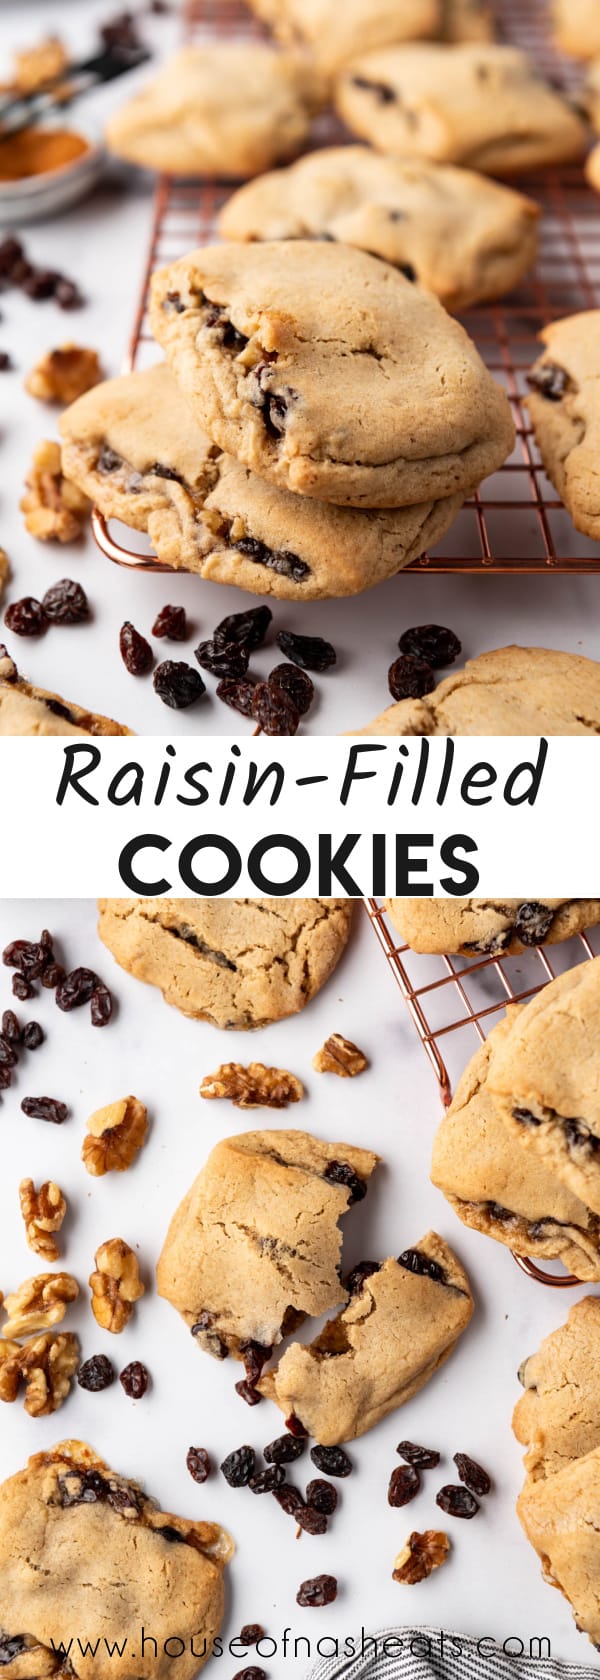 A collage of images of raisin-filled cookies with text overlay.